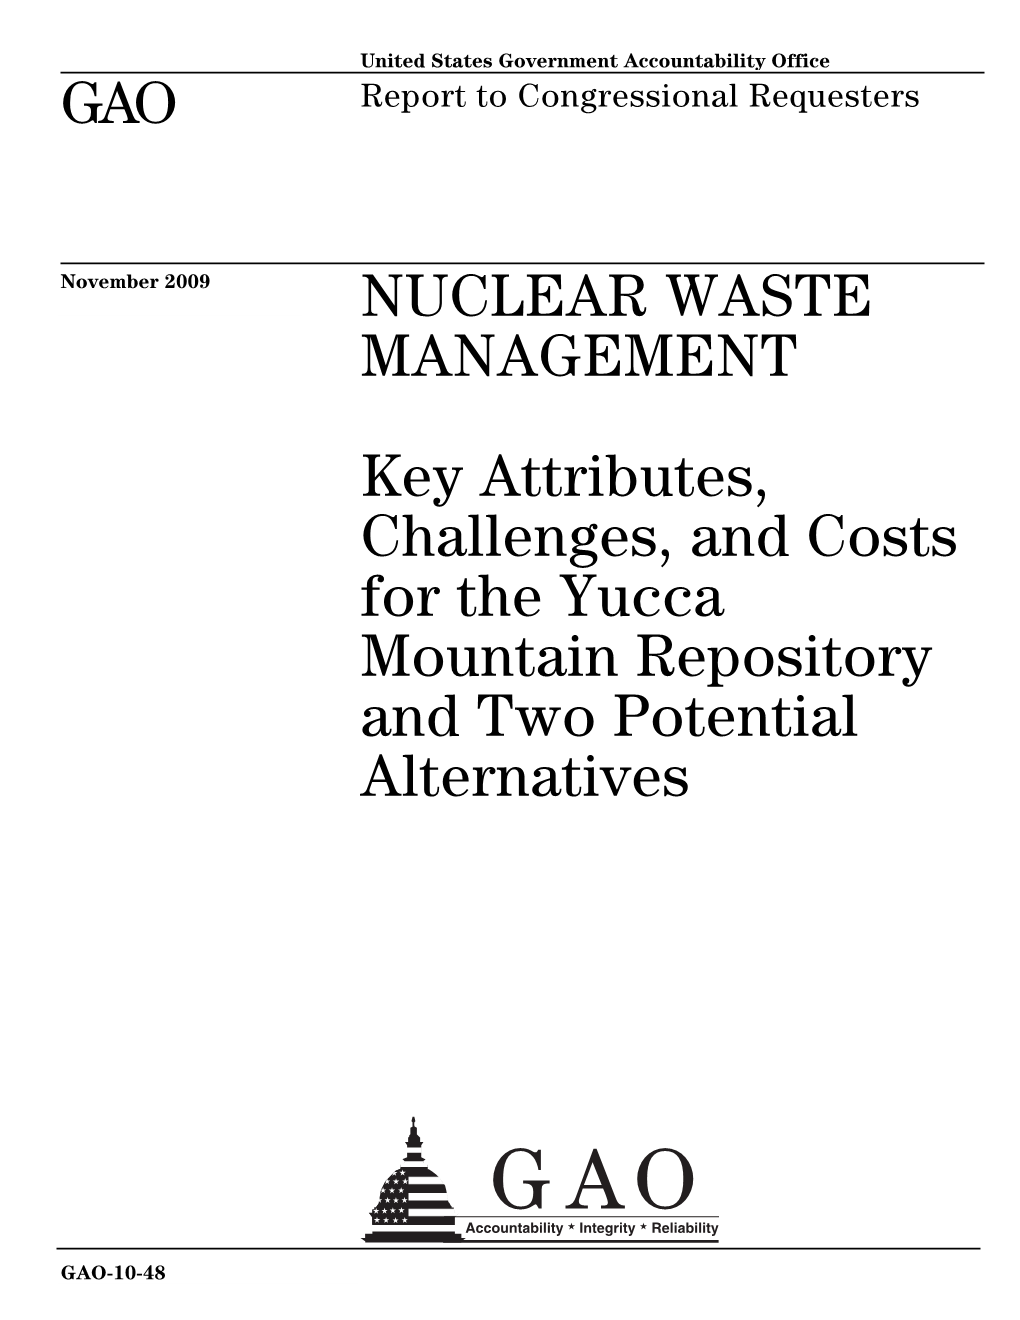 GAO-10-48 Nuclear Waste Management: Key Attributes